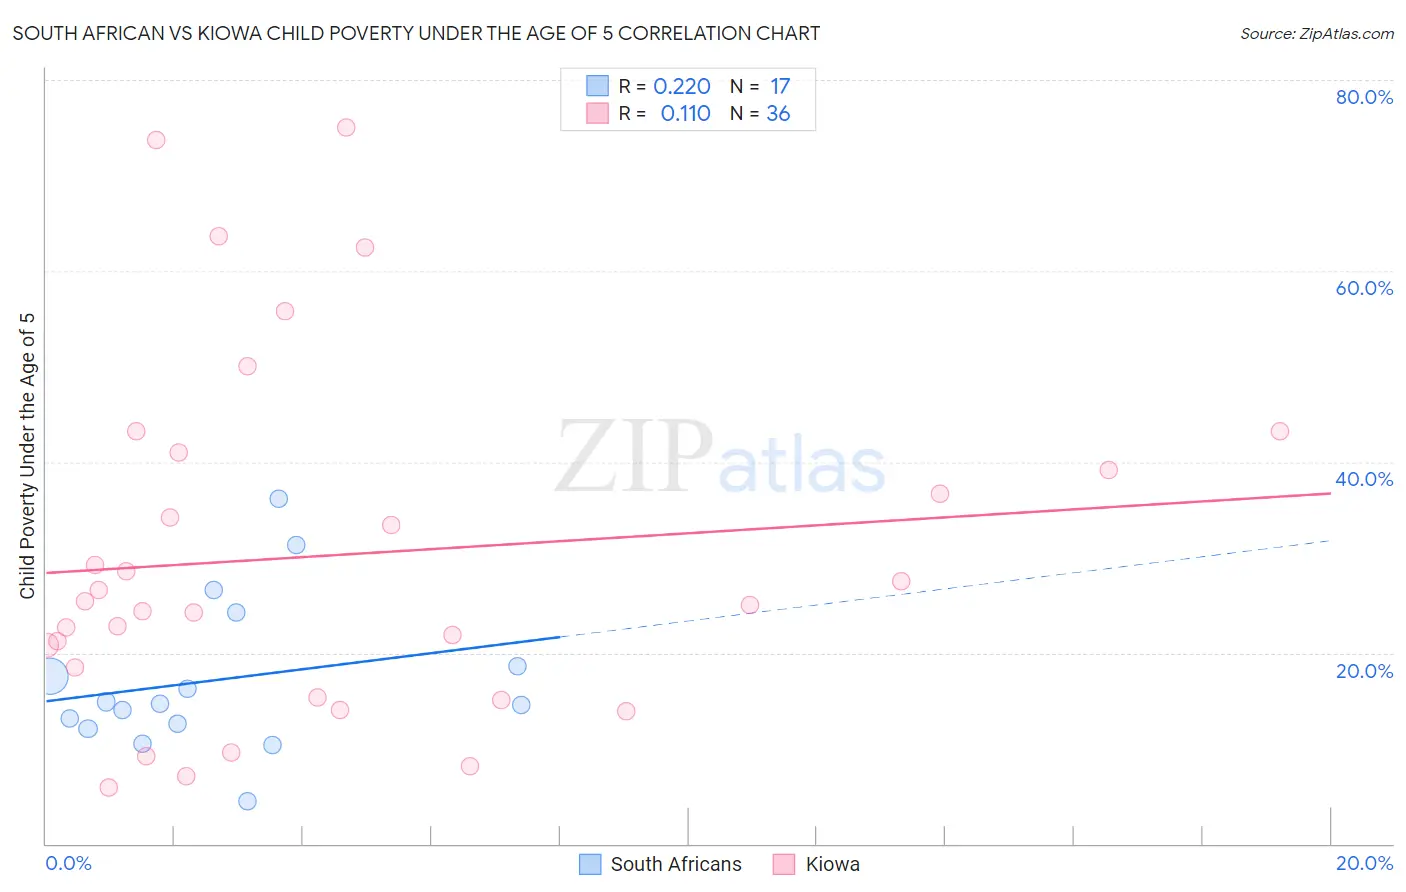 South African vs Kiowa Child Poverty Under the Age of 5